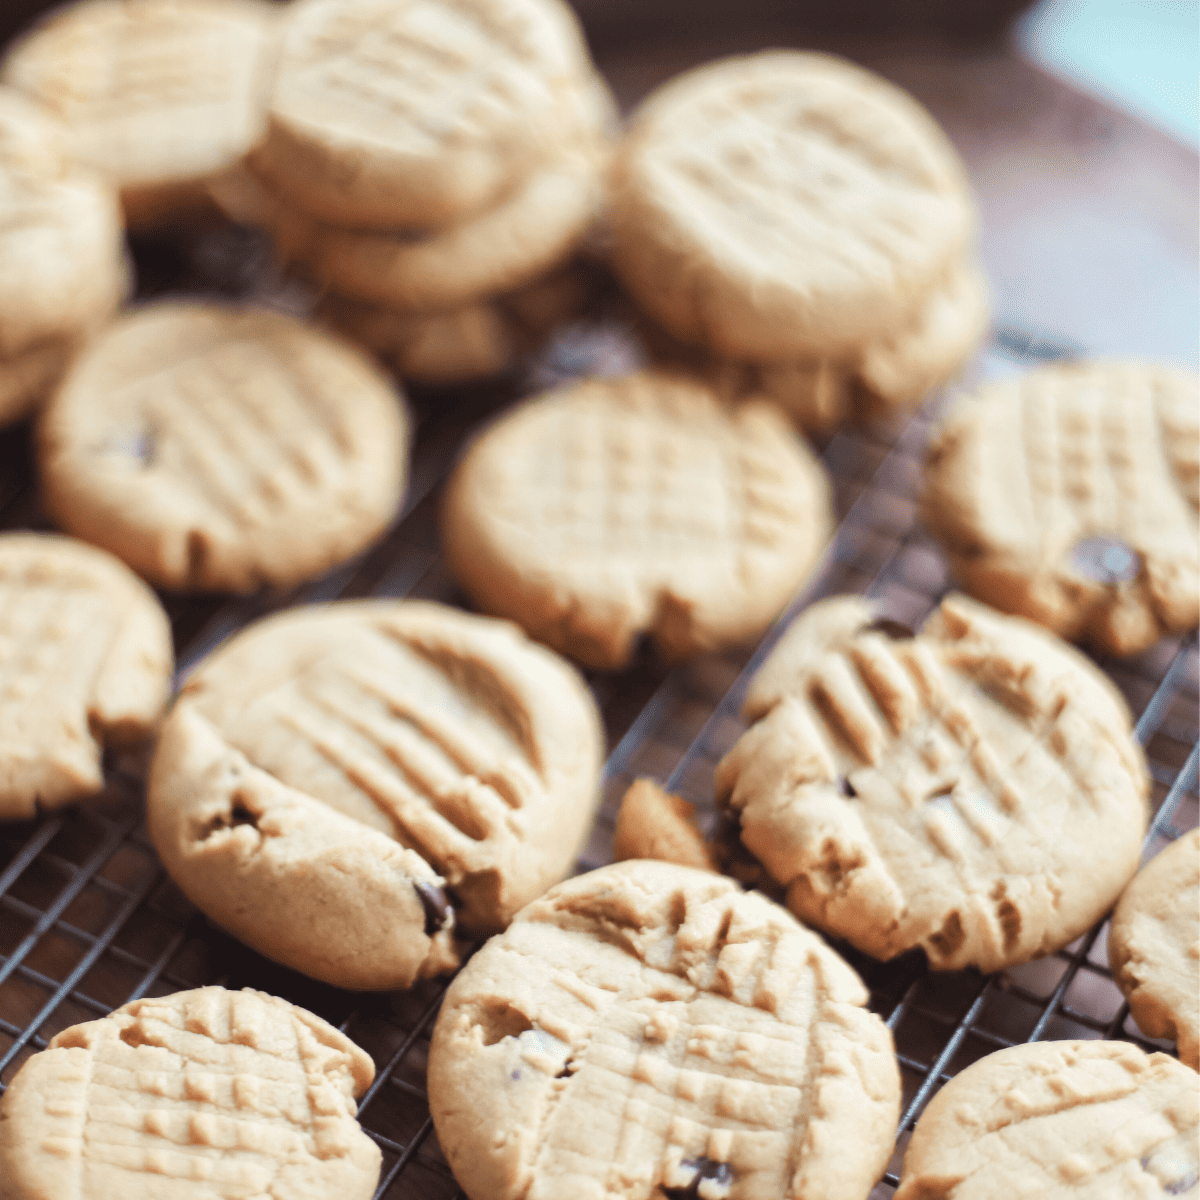 A tray of vegan peanut butter cookies.